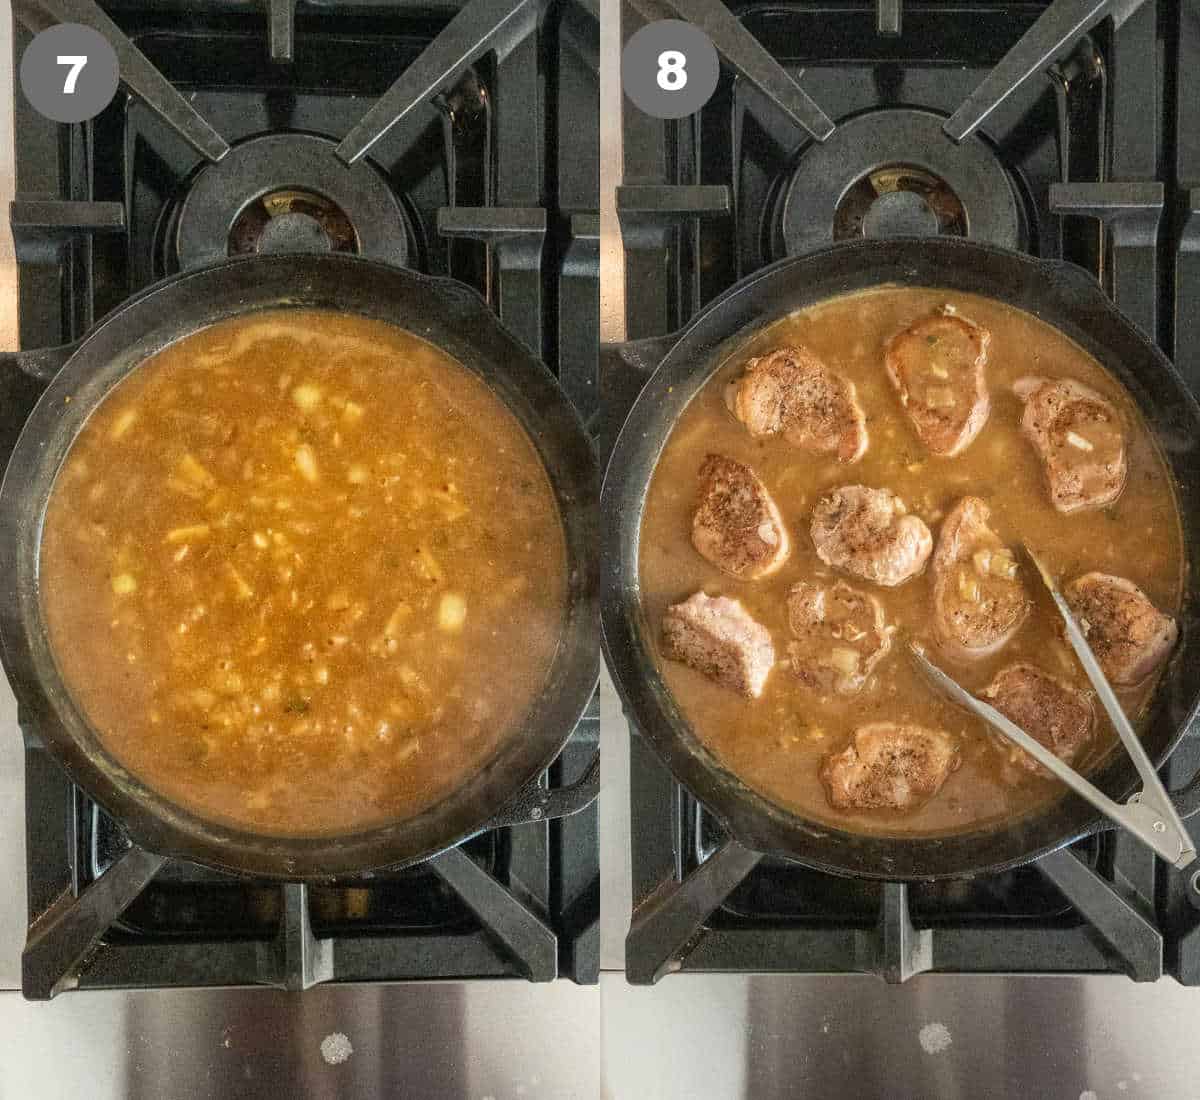 Steps 7 and 8 for cooking pork medallions.